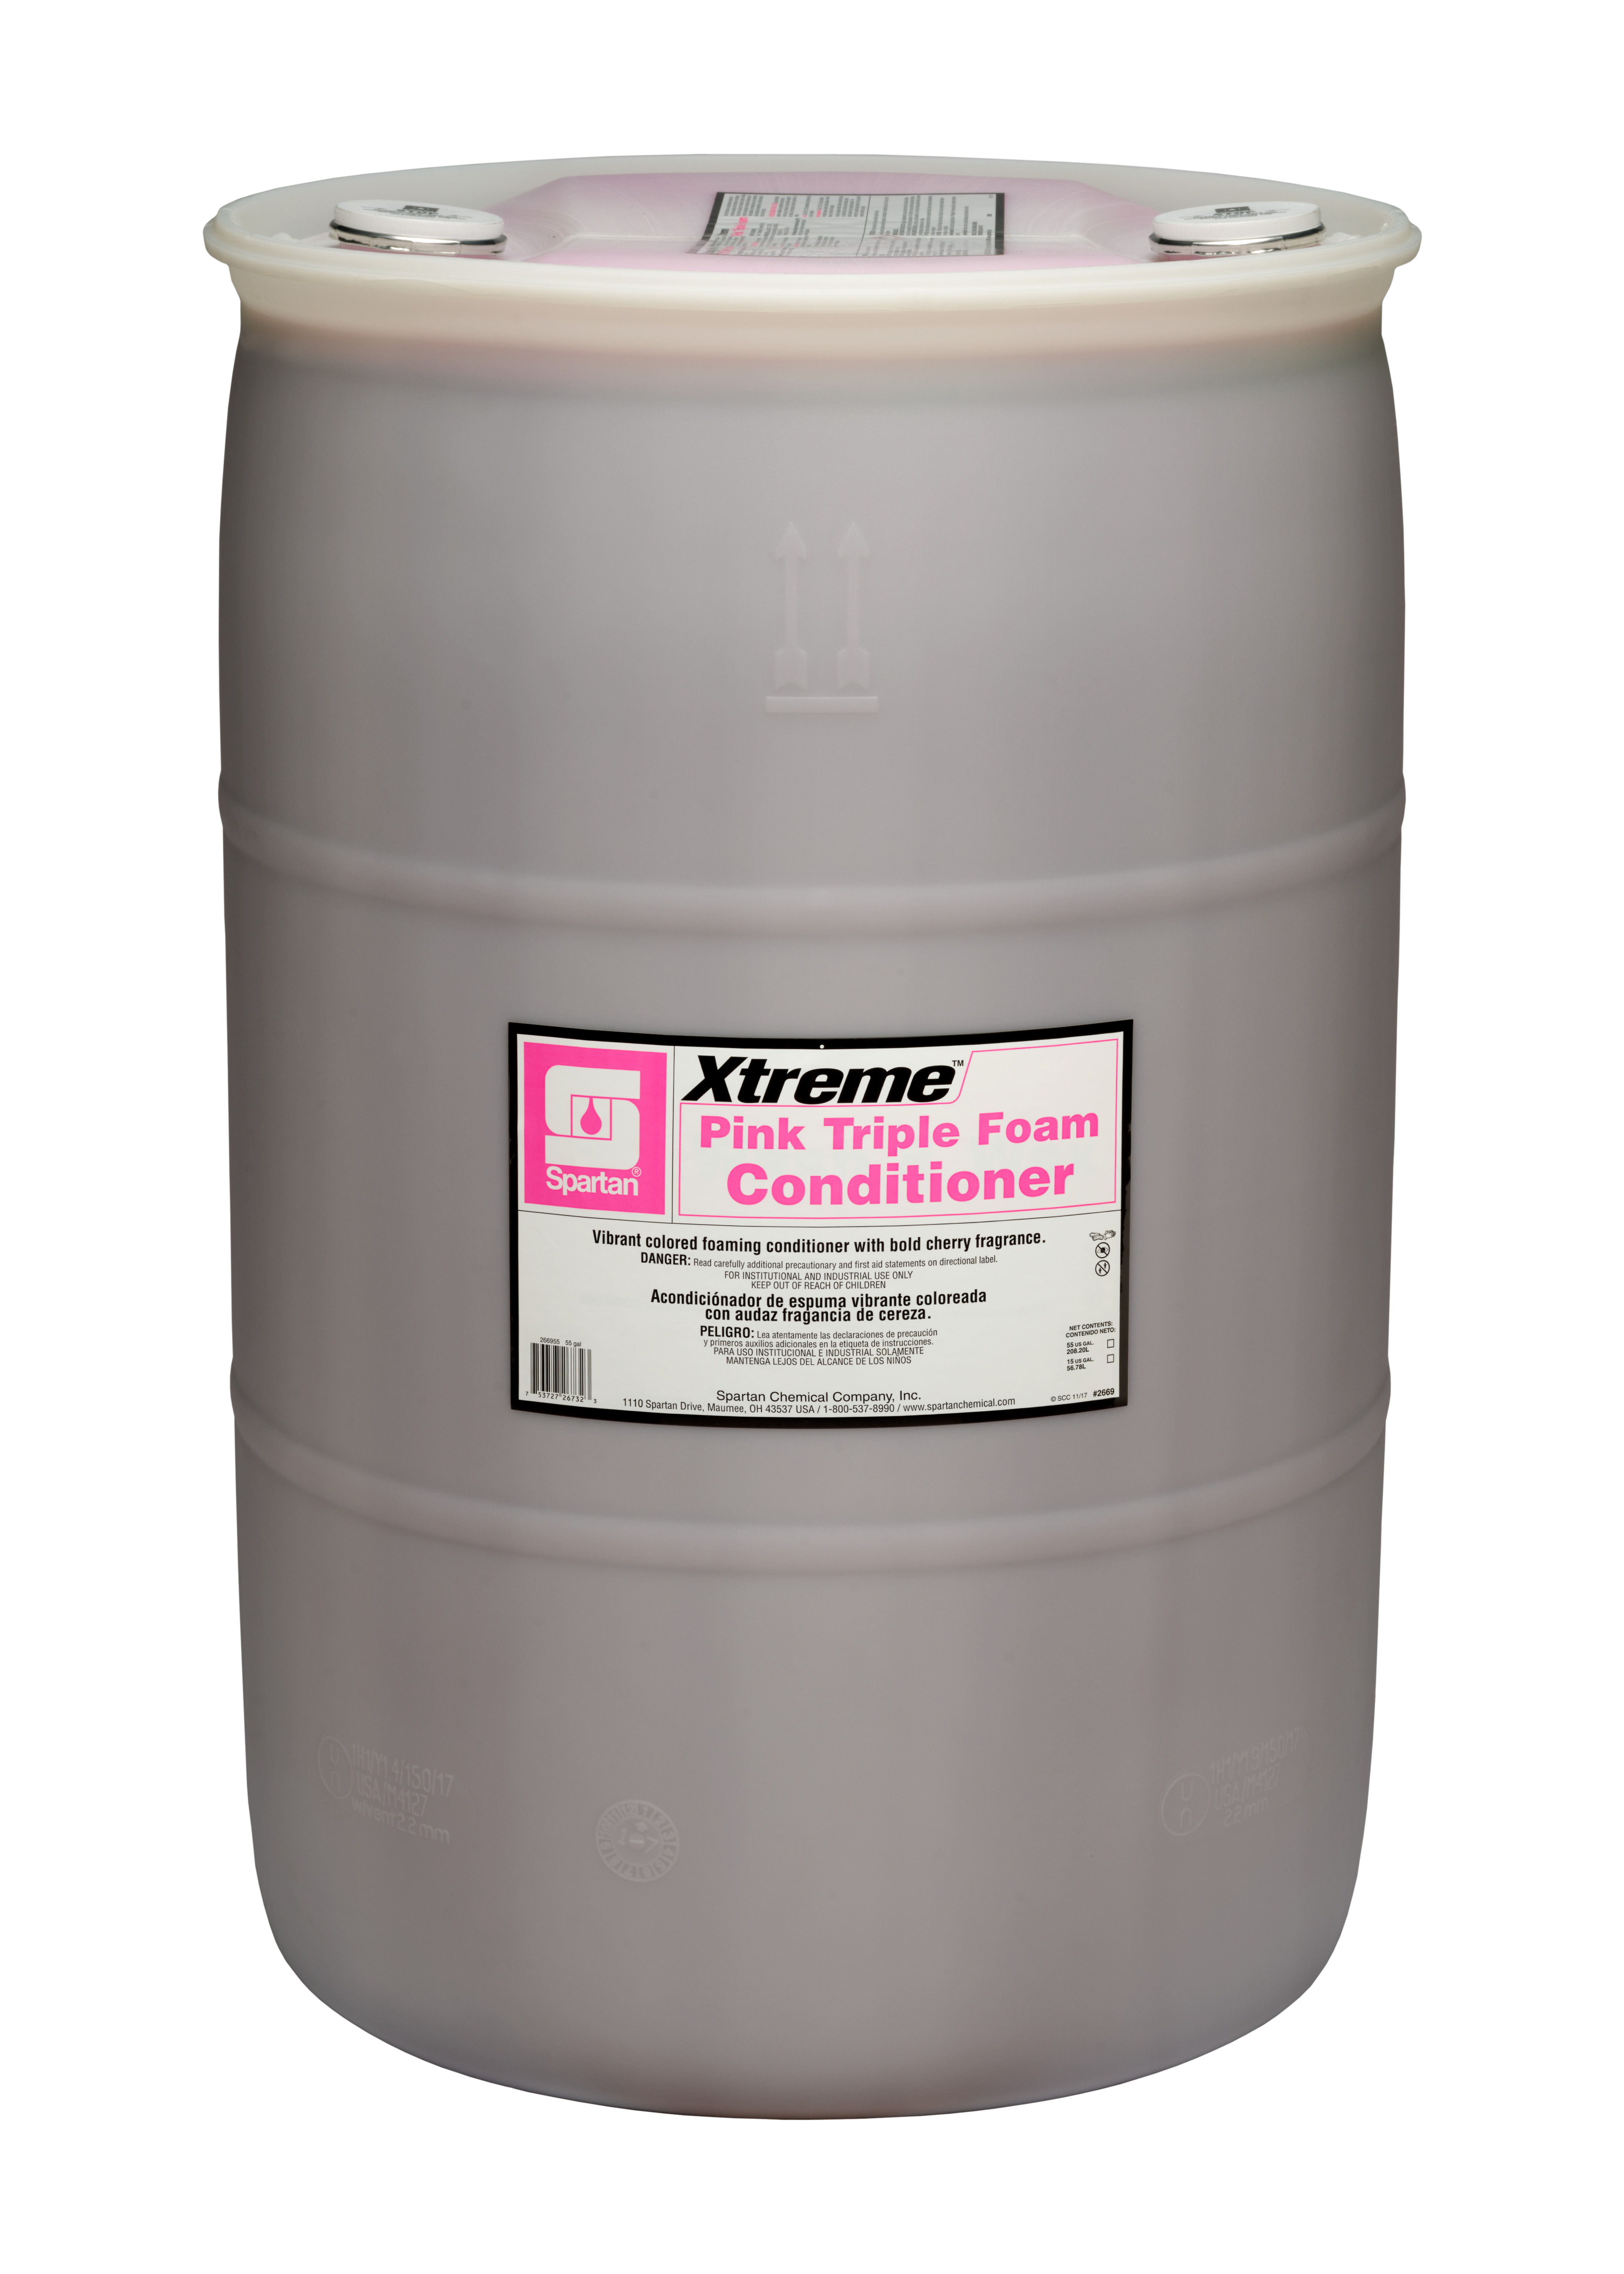 Spartan Chemical Company Xtreme Pink Triple Foam Conditioner, 55 GAL DRUM